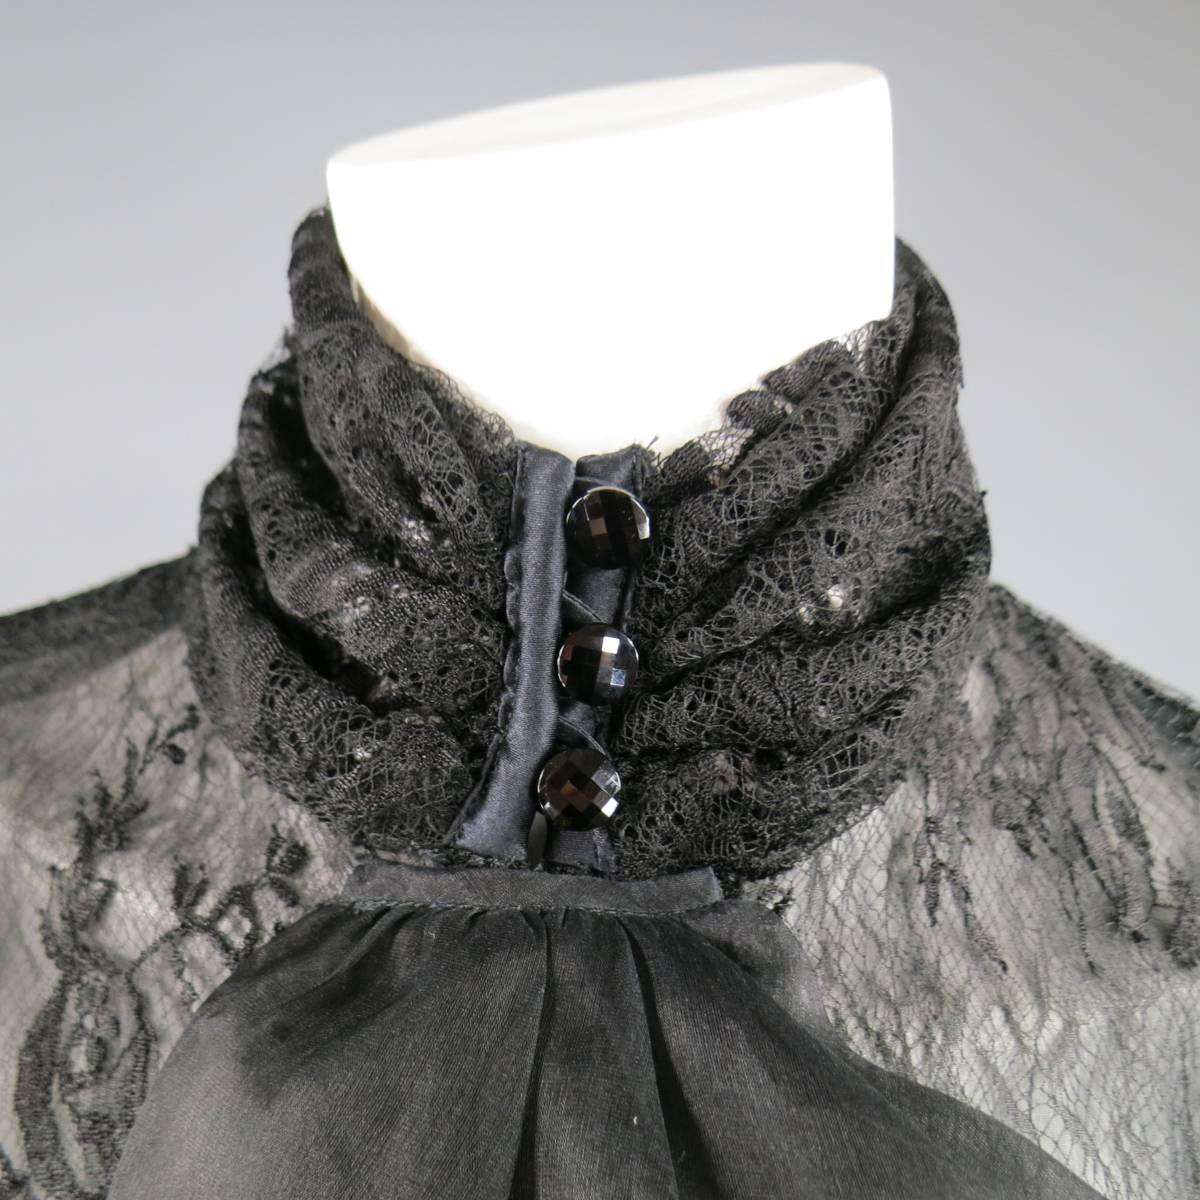 This stunning vintage EMANUEL UNGARO blouse comes in a black floral lace and features a high neck with black crystal buttons, ruffled ascot accent, and dramatic pleated puff sleeves. Made in Italy.
 
Excellent Pre-Owned Condition.
